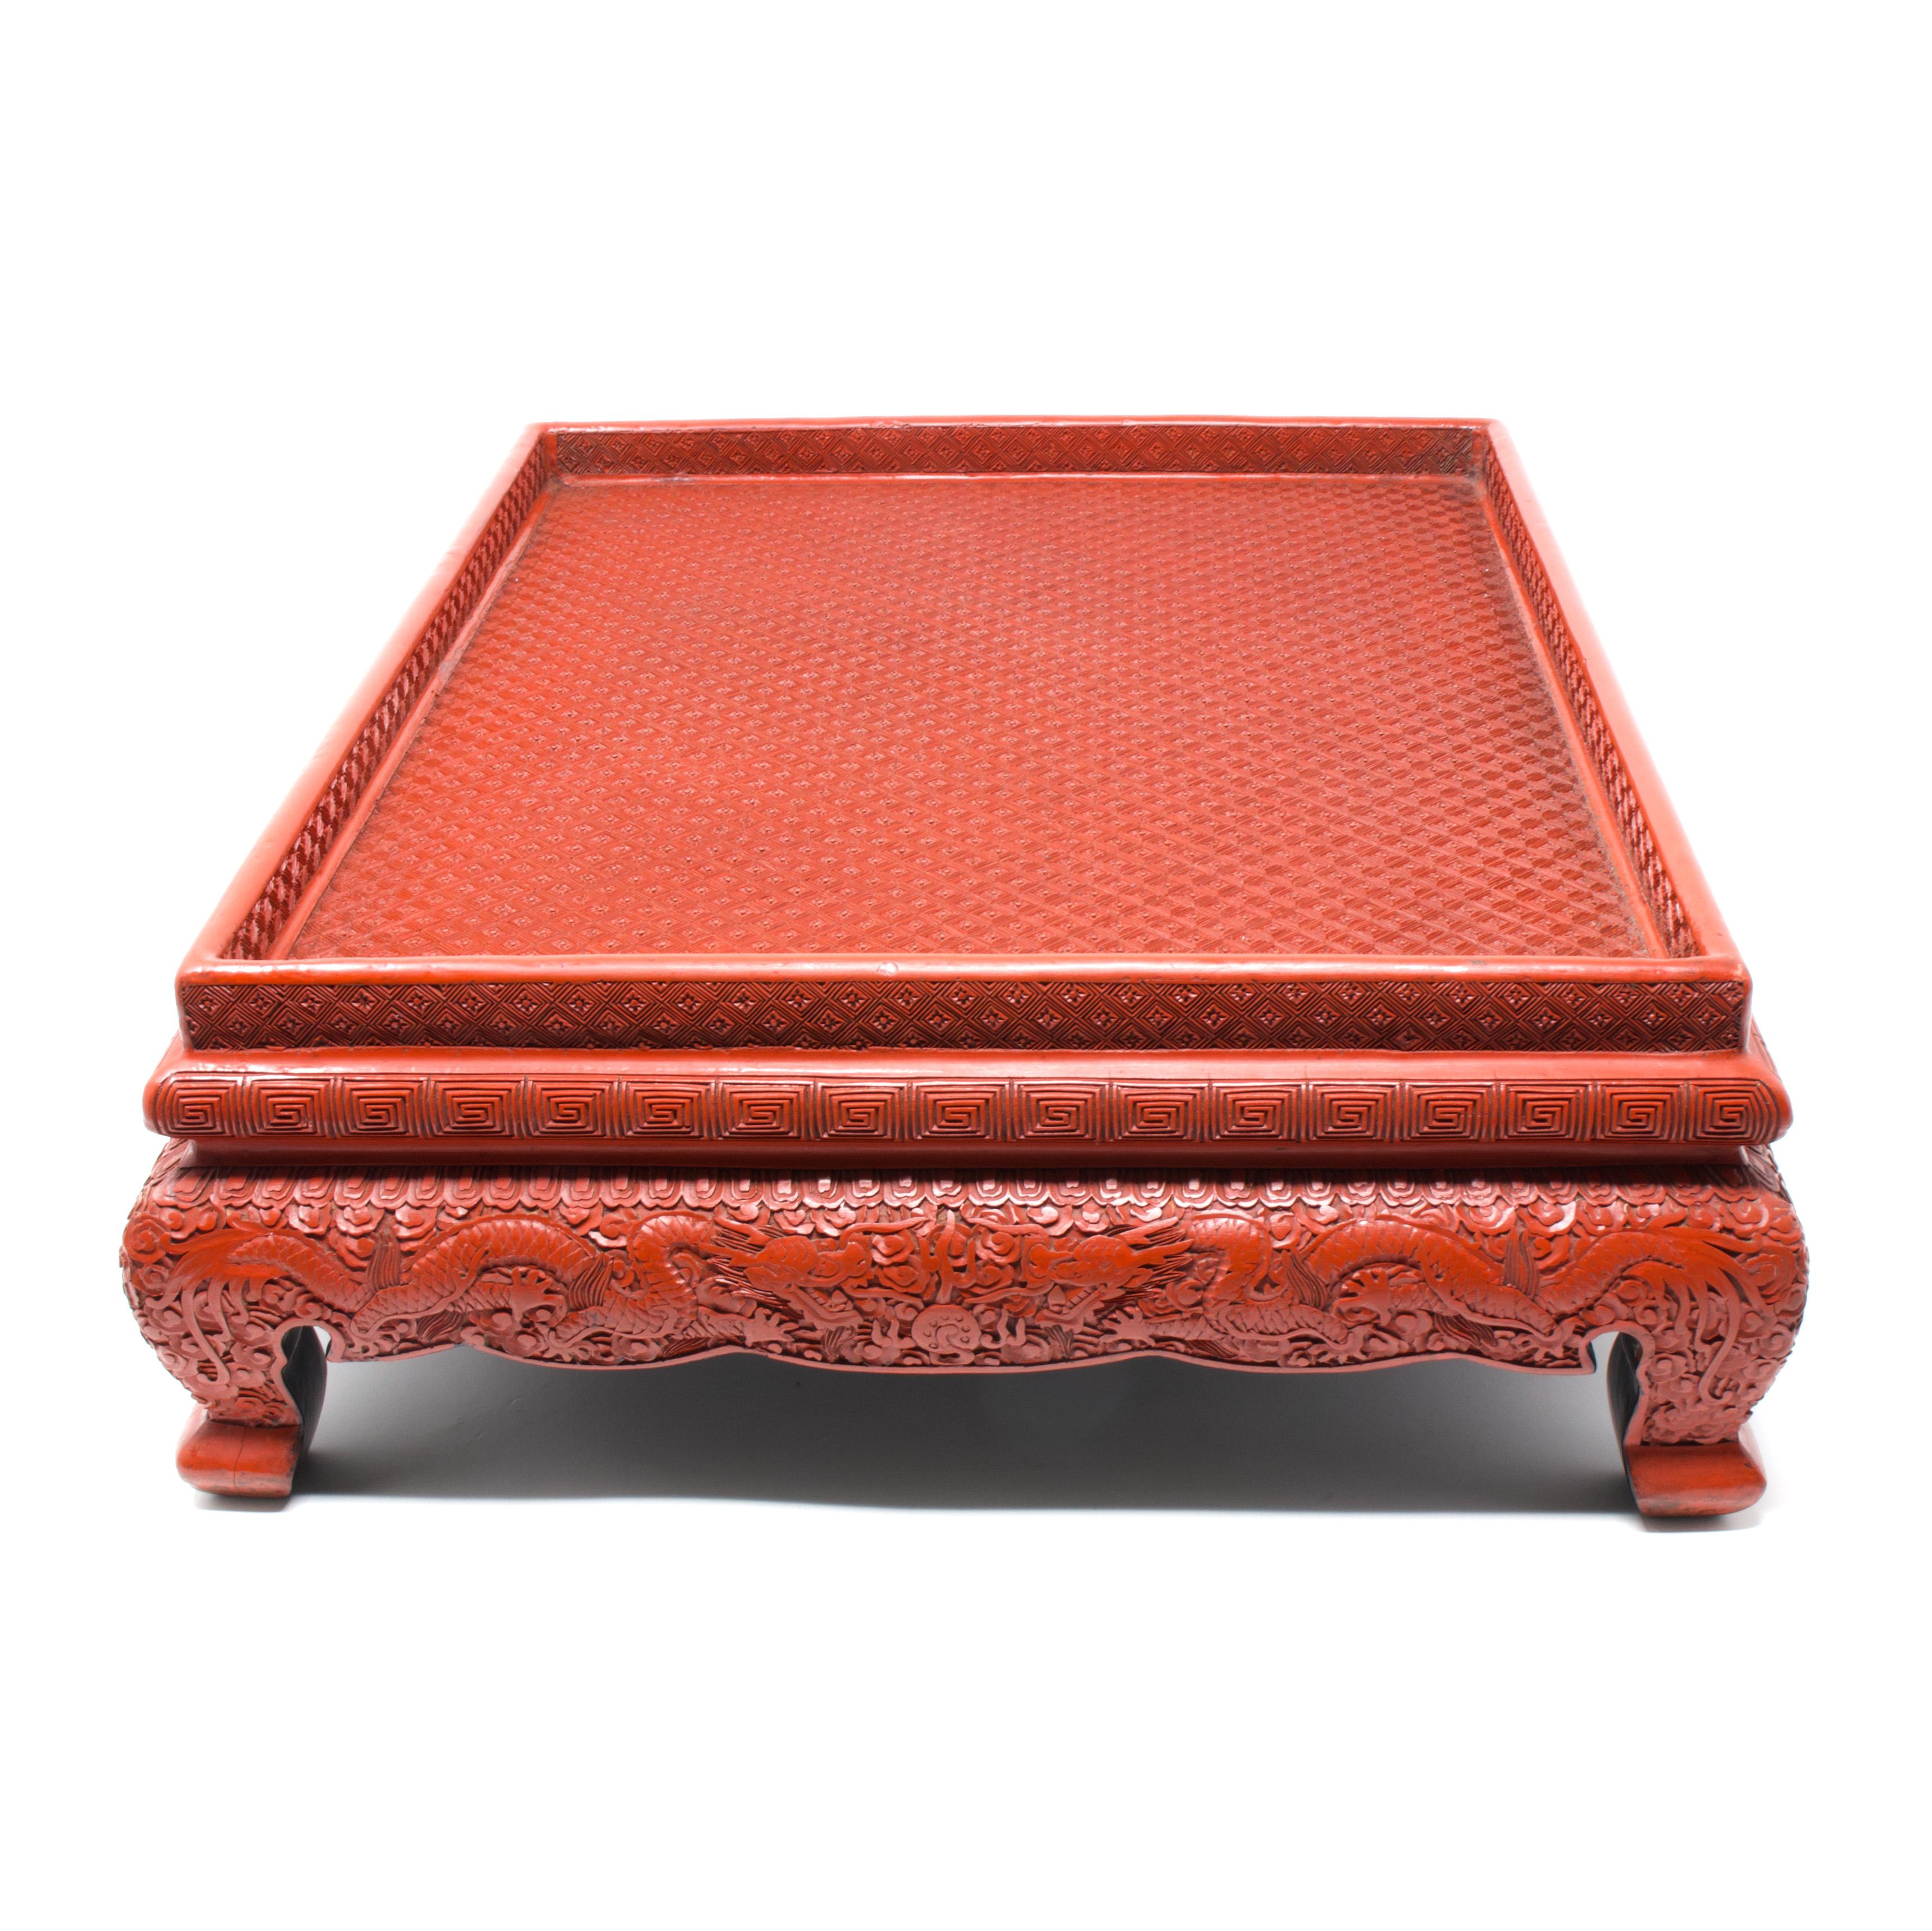 Antique Chinese Cinnabar Lacquer Tray/Stand with Dragon Design, Guangxu Period (1875-1908).
A dark vermillion red carved cinnabar lacquered Scholar’s tray on raised and footed supports. The top and sides of the tray carved in tight geometric